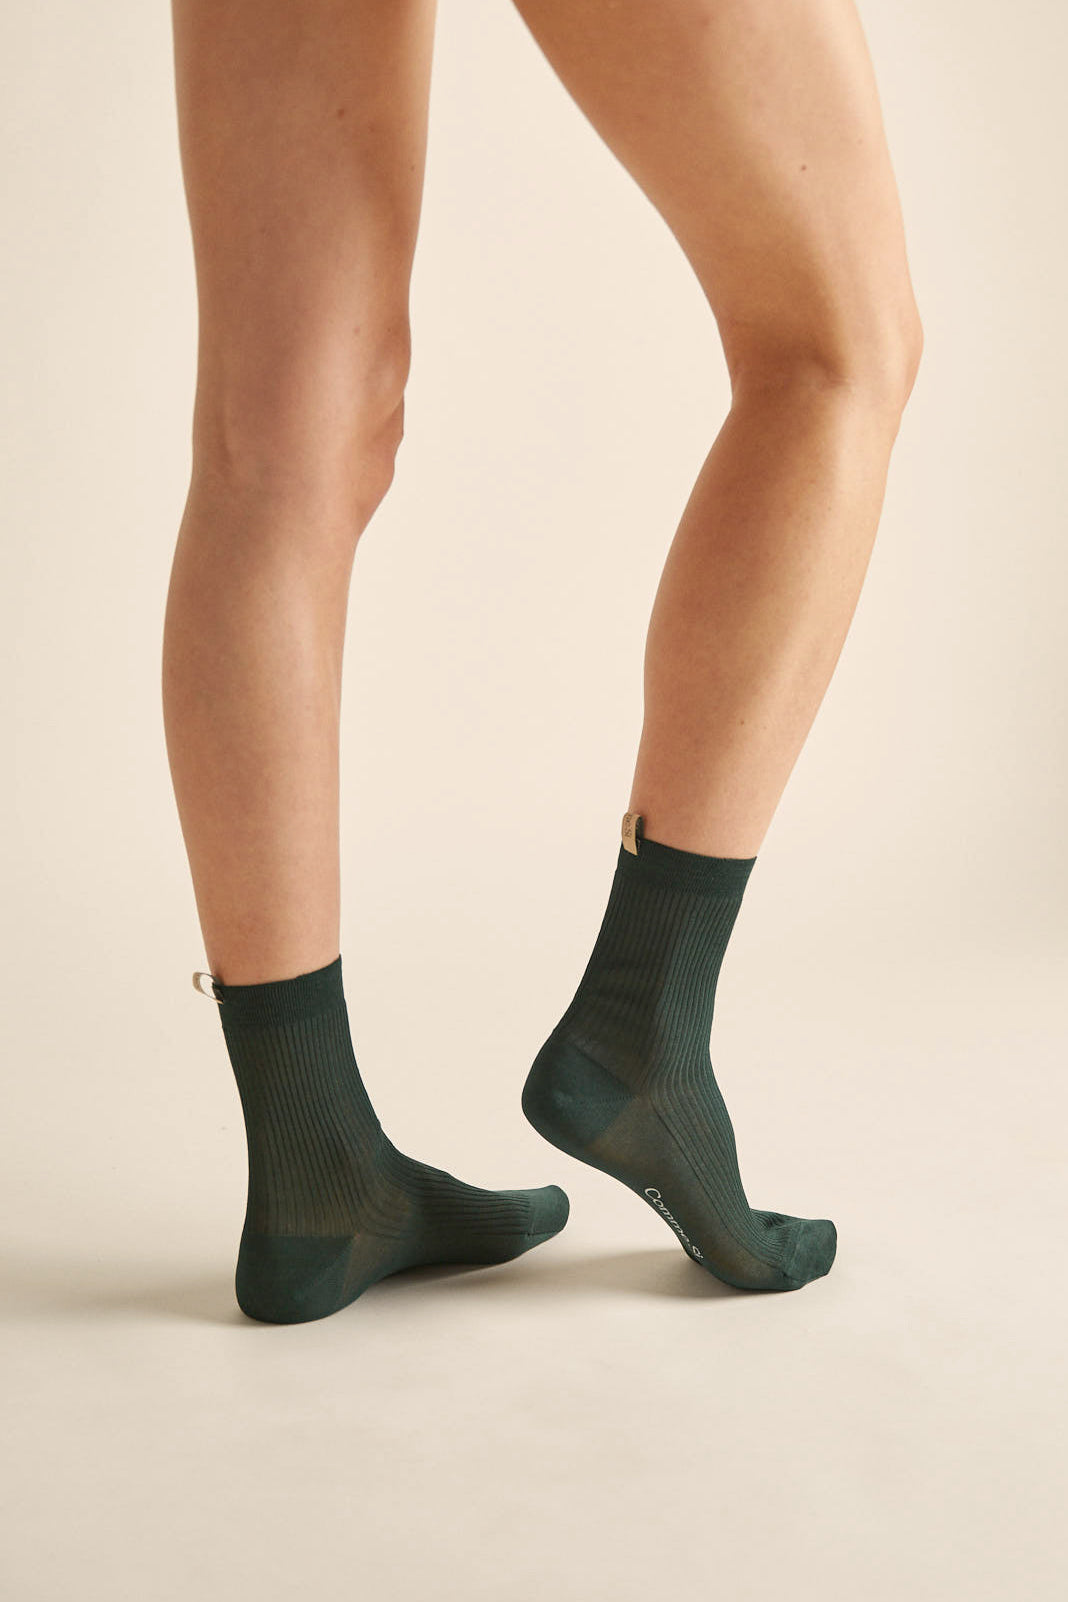 The Agnelli Sock in pine, egyptian cotton, by comme si